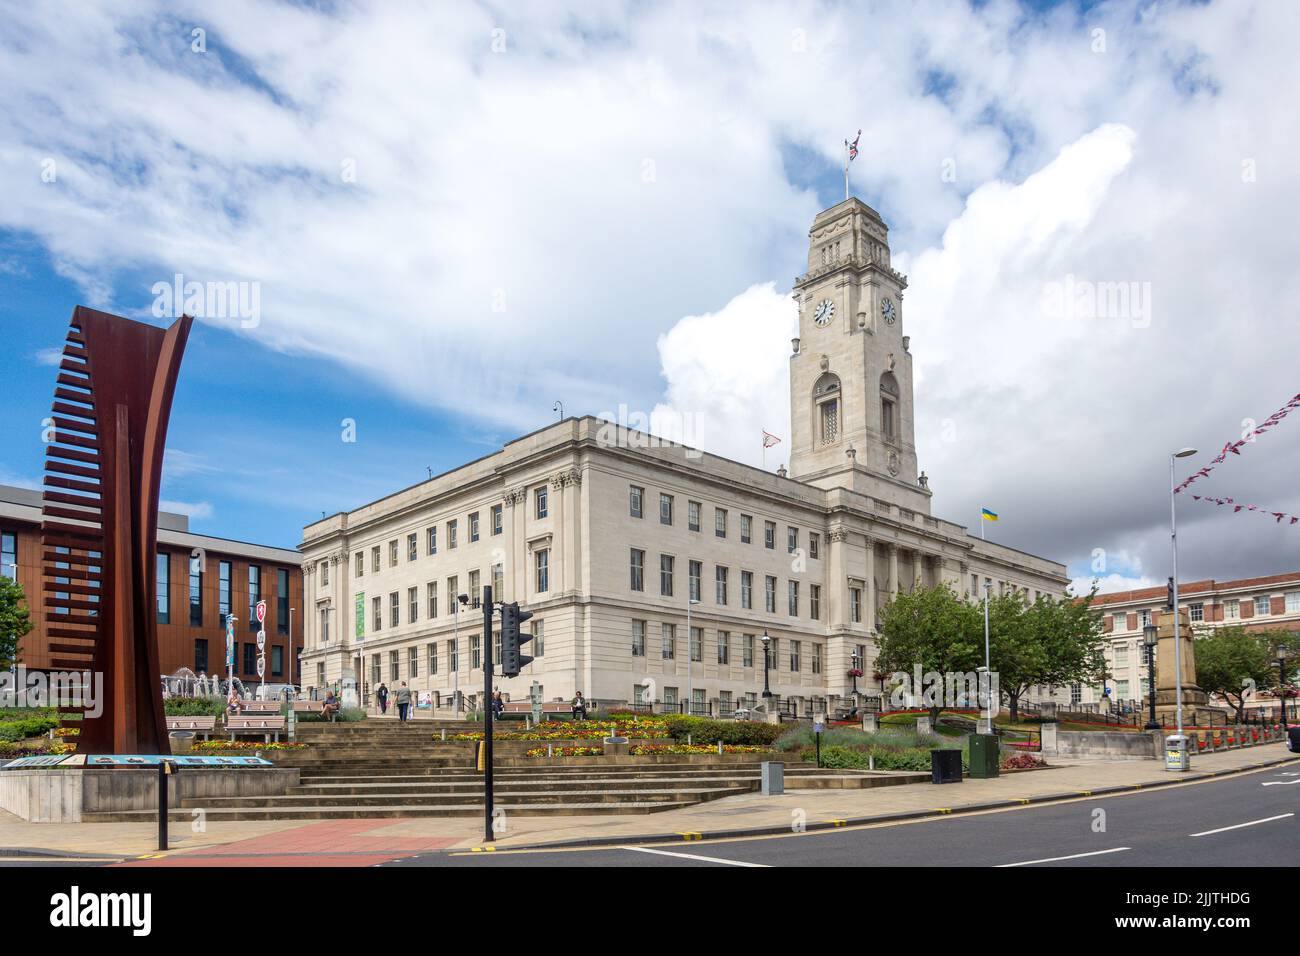 Barnsley Town Hall and 'Crossing Vertical' sculpture, Church Street, Barnsley, South Yorkshire, England, United Kingdom Stock Photo